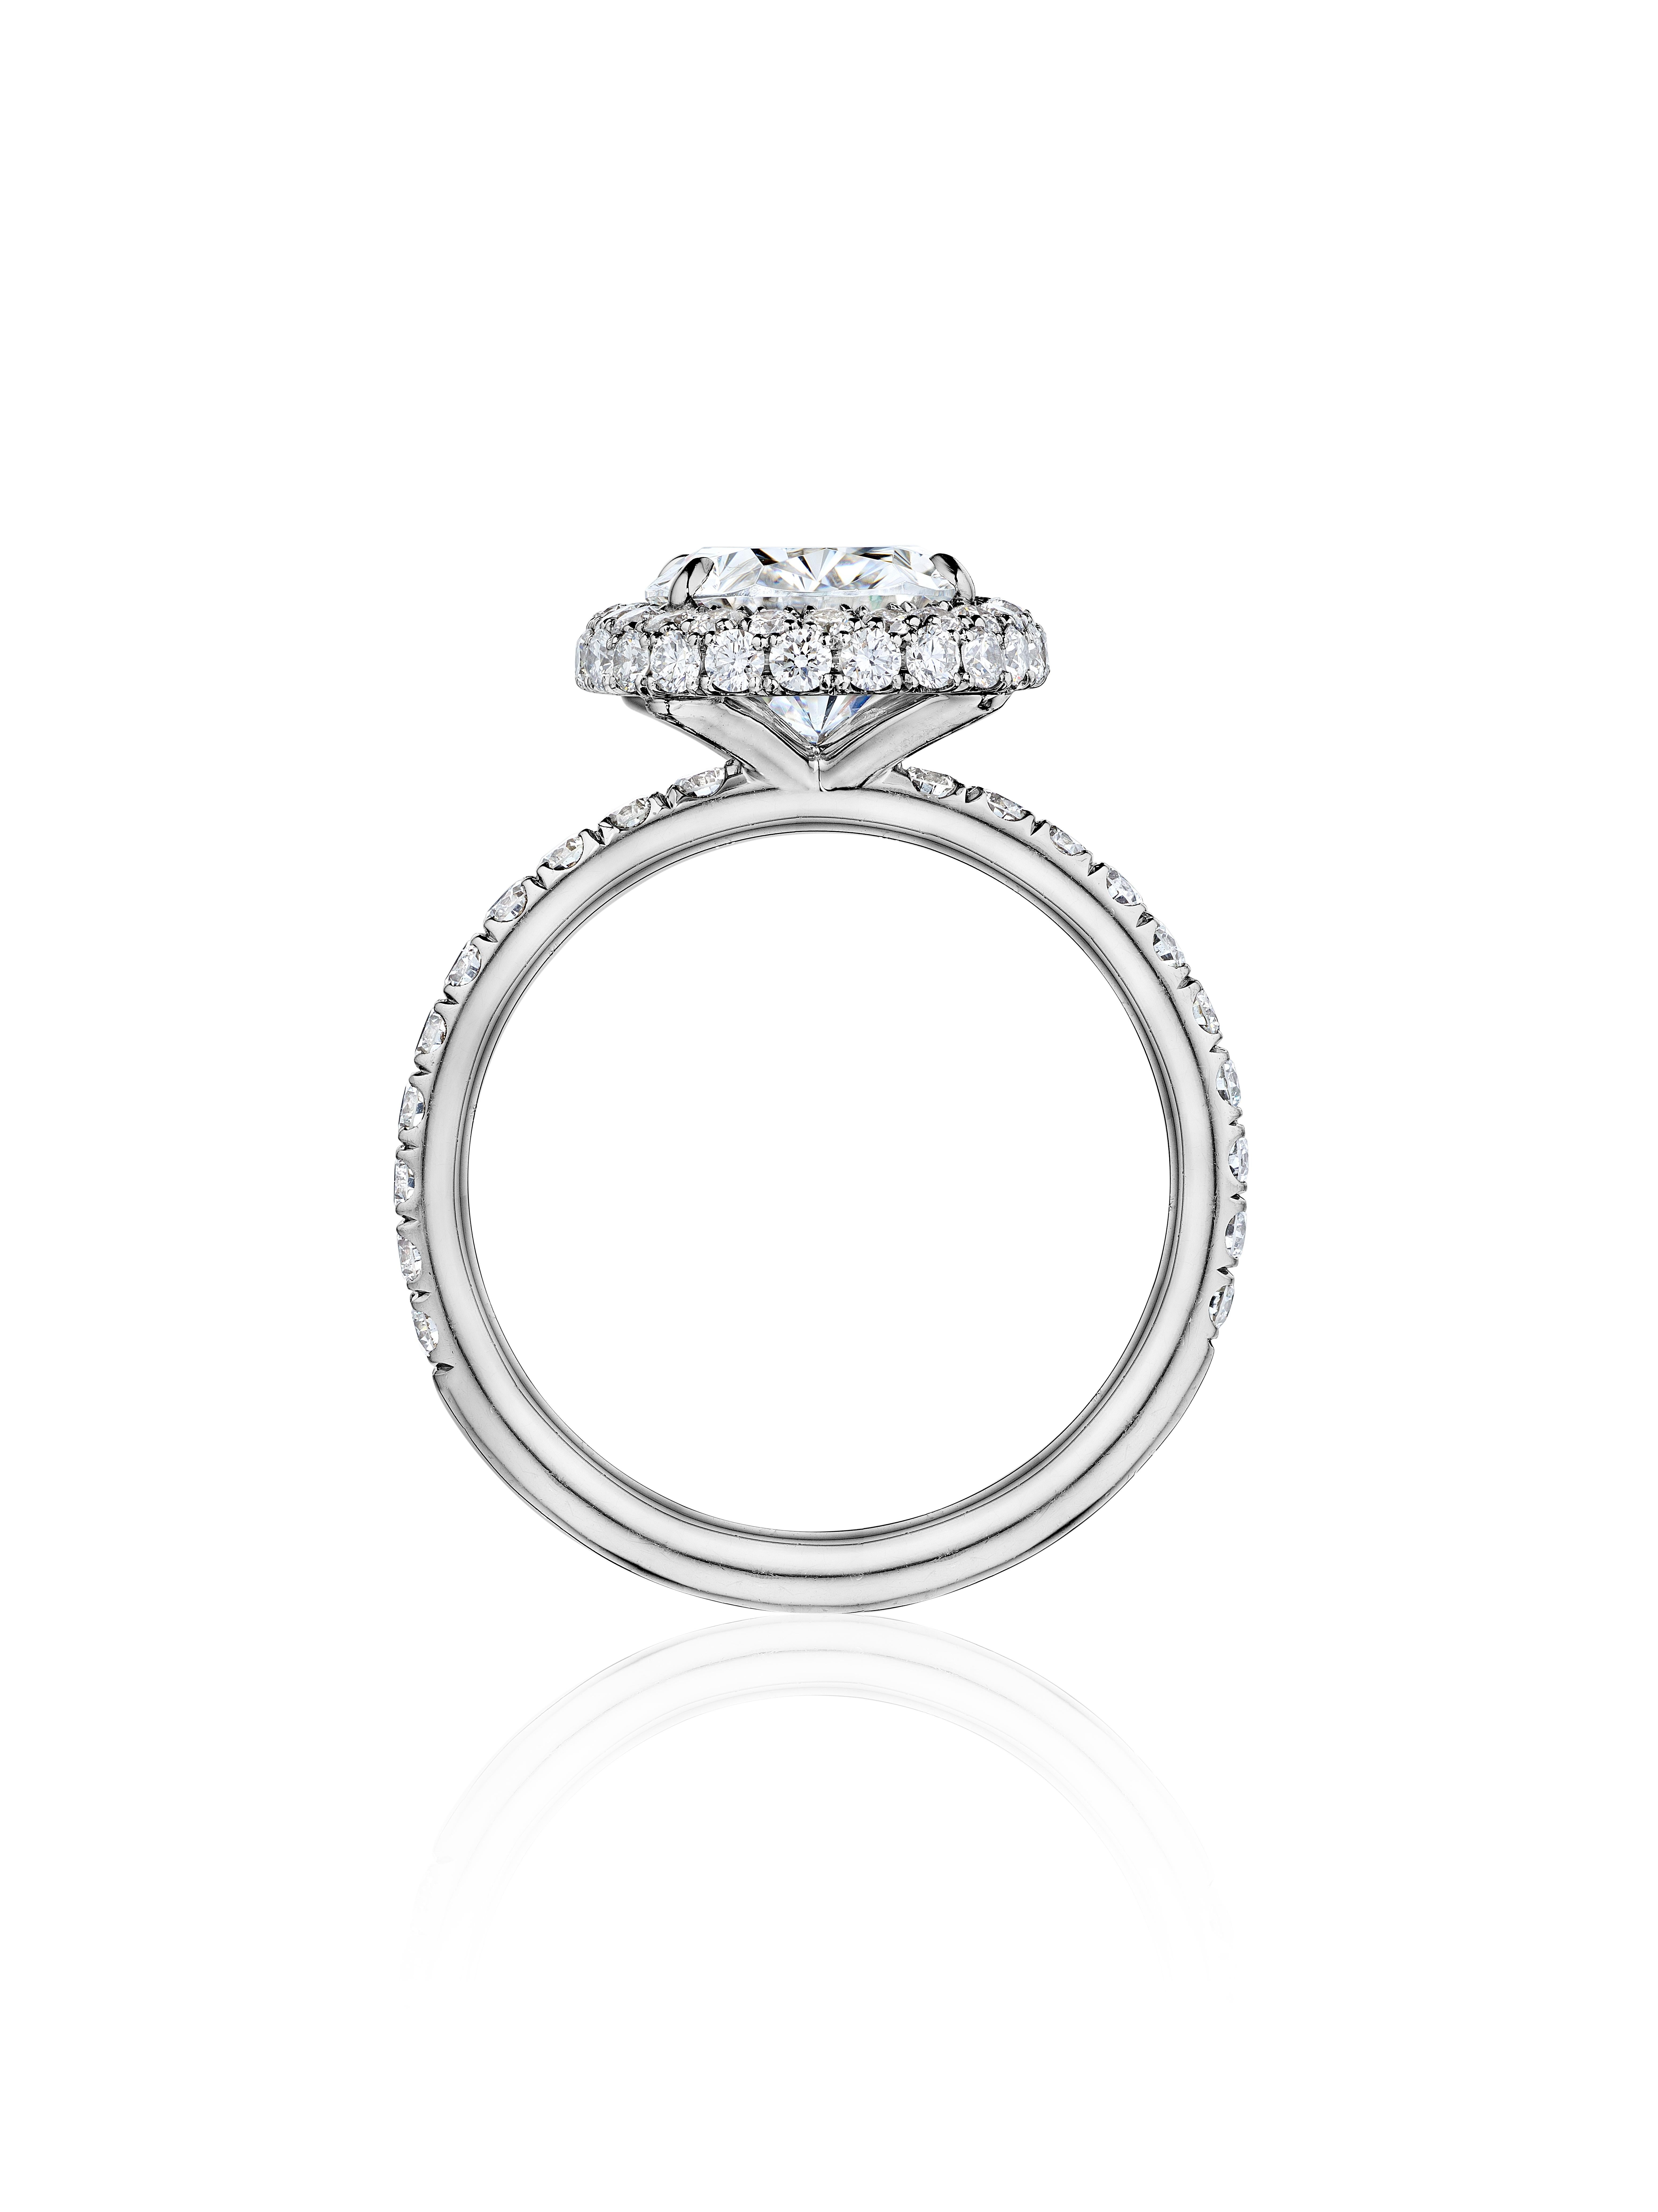 Modern GIA Certified 2.50 Carat E SI1 Oval Diamond Engagement Ring 